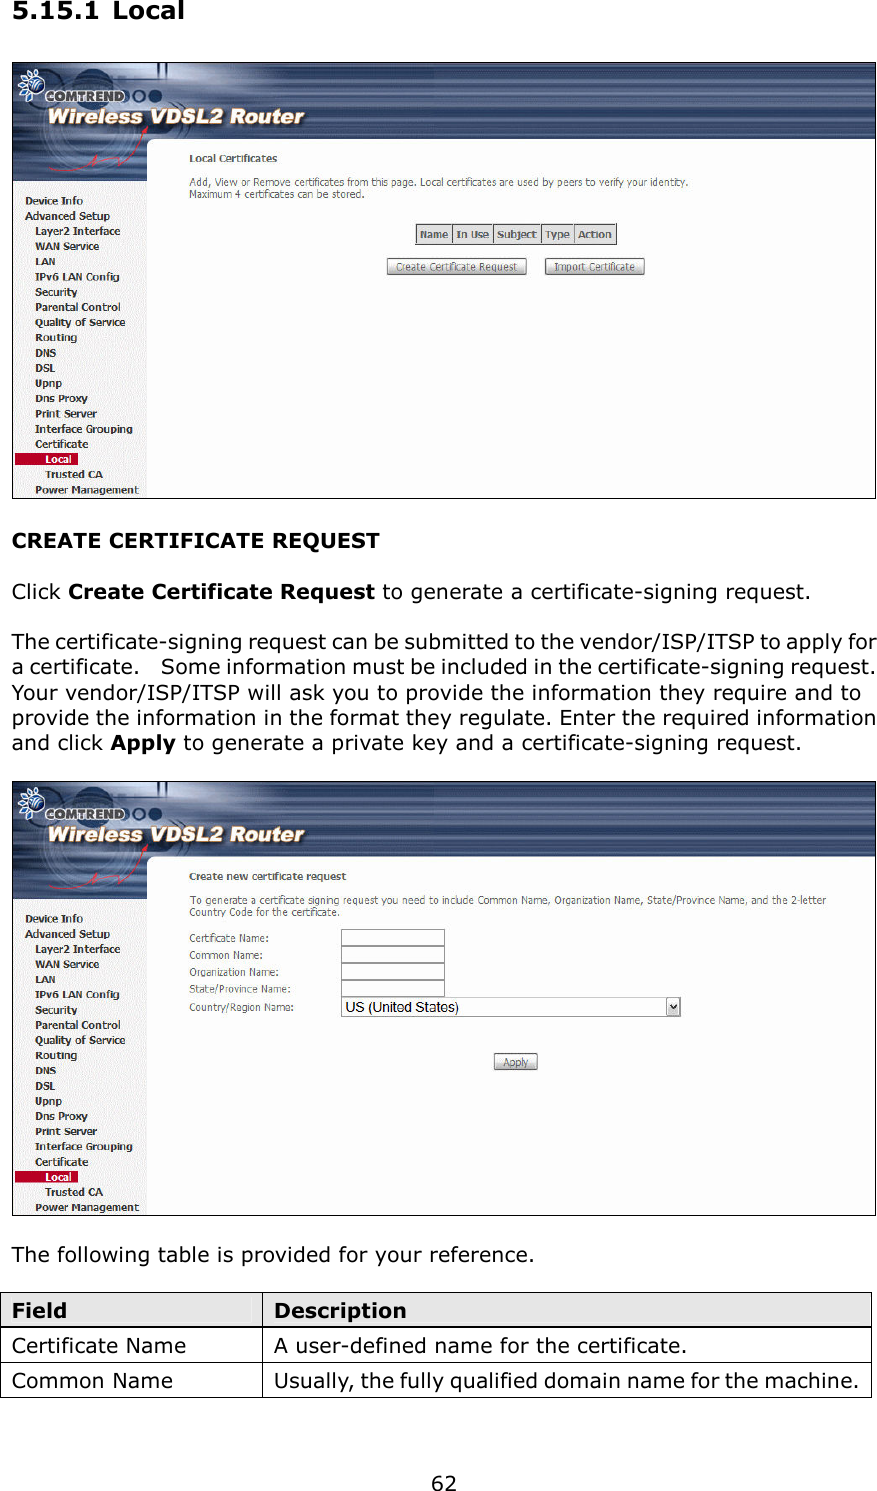   62 5.15.1 Local  CREATE CERTIFICATE REQUEST  Click Create Certificate Request to generate a certificate-signing request.    The certificate-signing request can be submitted to the vendor/ISP/ITSP to apply for a certificate.    Some information must be included in the certificate-signing request.   Your vendor/ISP/ITSP will ask you to provide the information they require and to provide the information in the format they regulate. Enter the required information and click Apply to generate a private key and a certificate-signing request.        The following table is provided for your reference.  Field  Description Certificate Name  A user-defined name for the certificate. Common Name  Usually, the fully qualified domain name for the machine.   